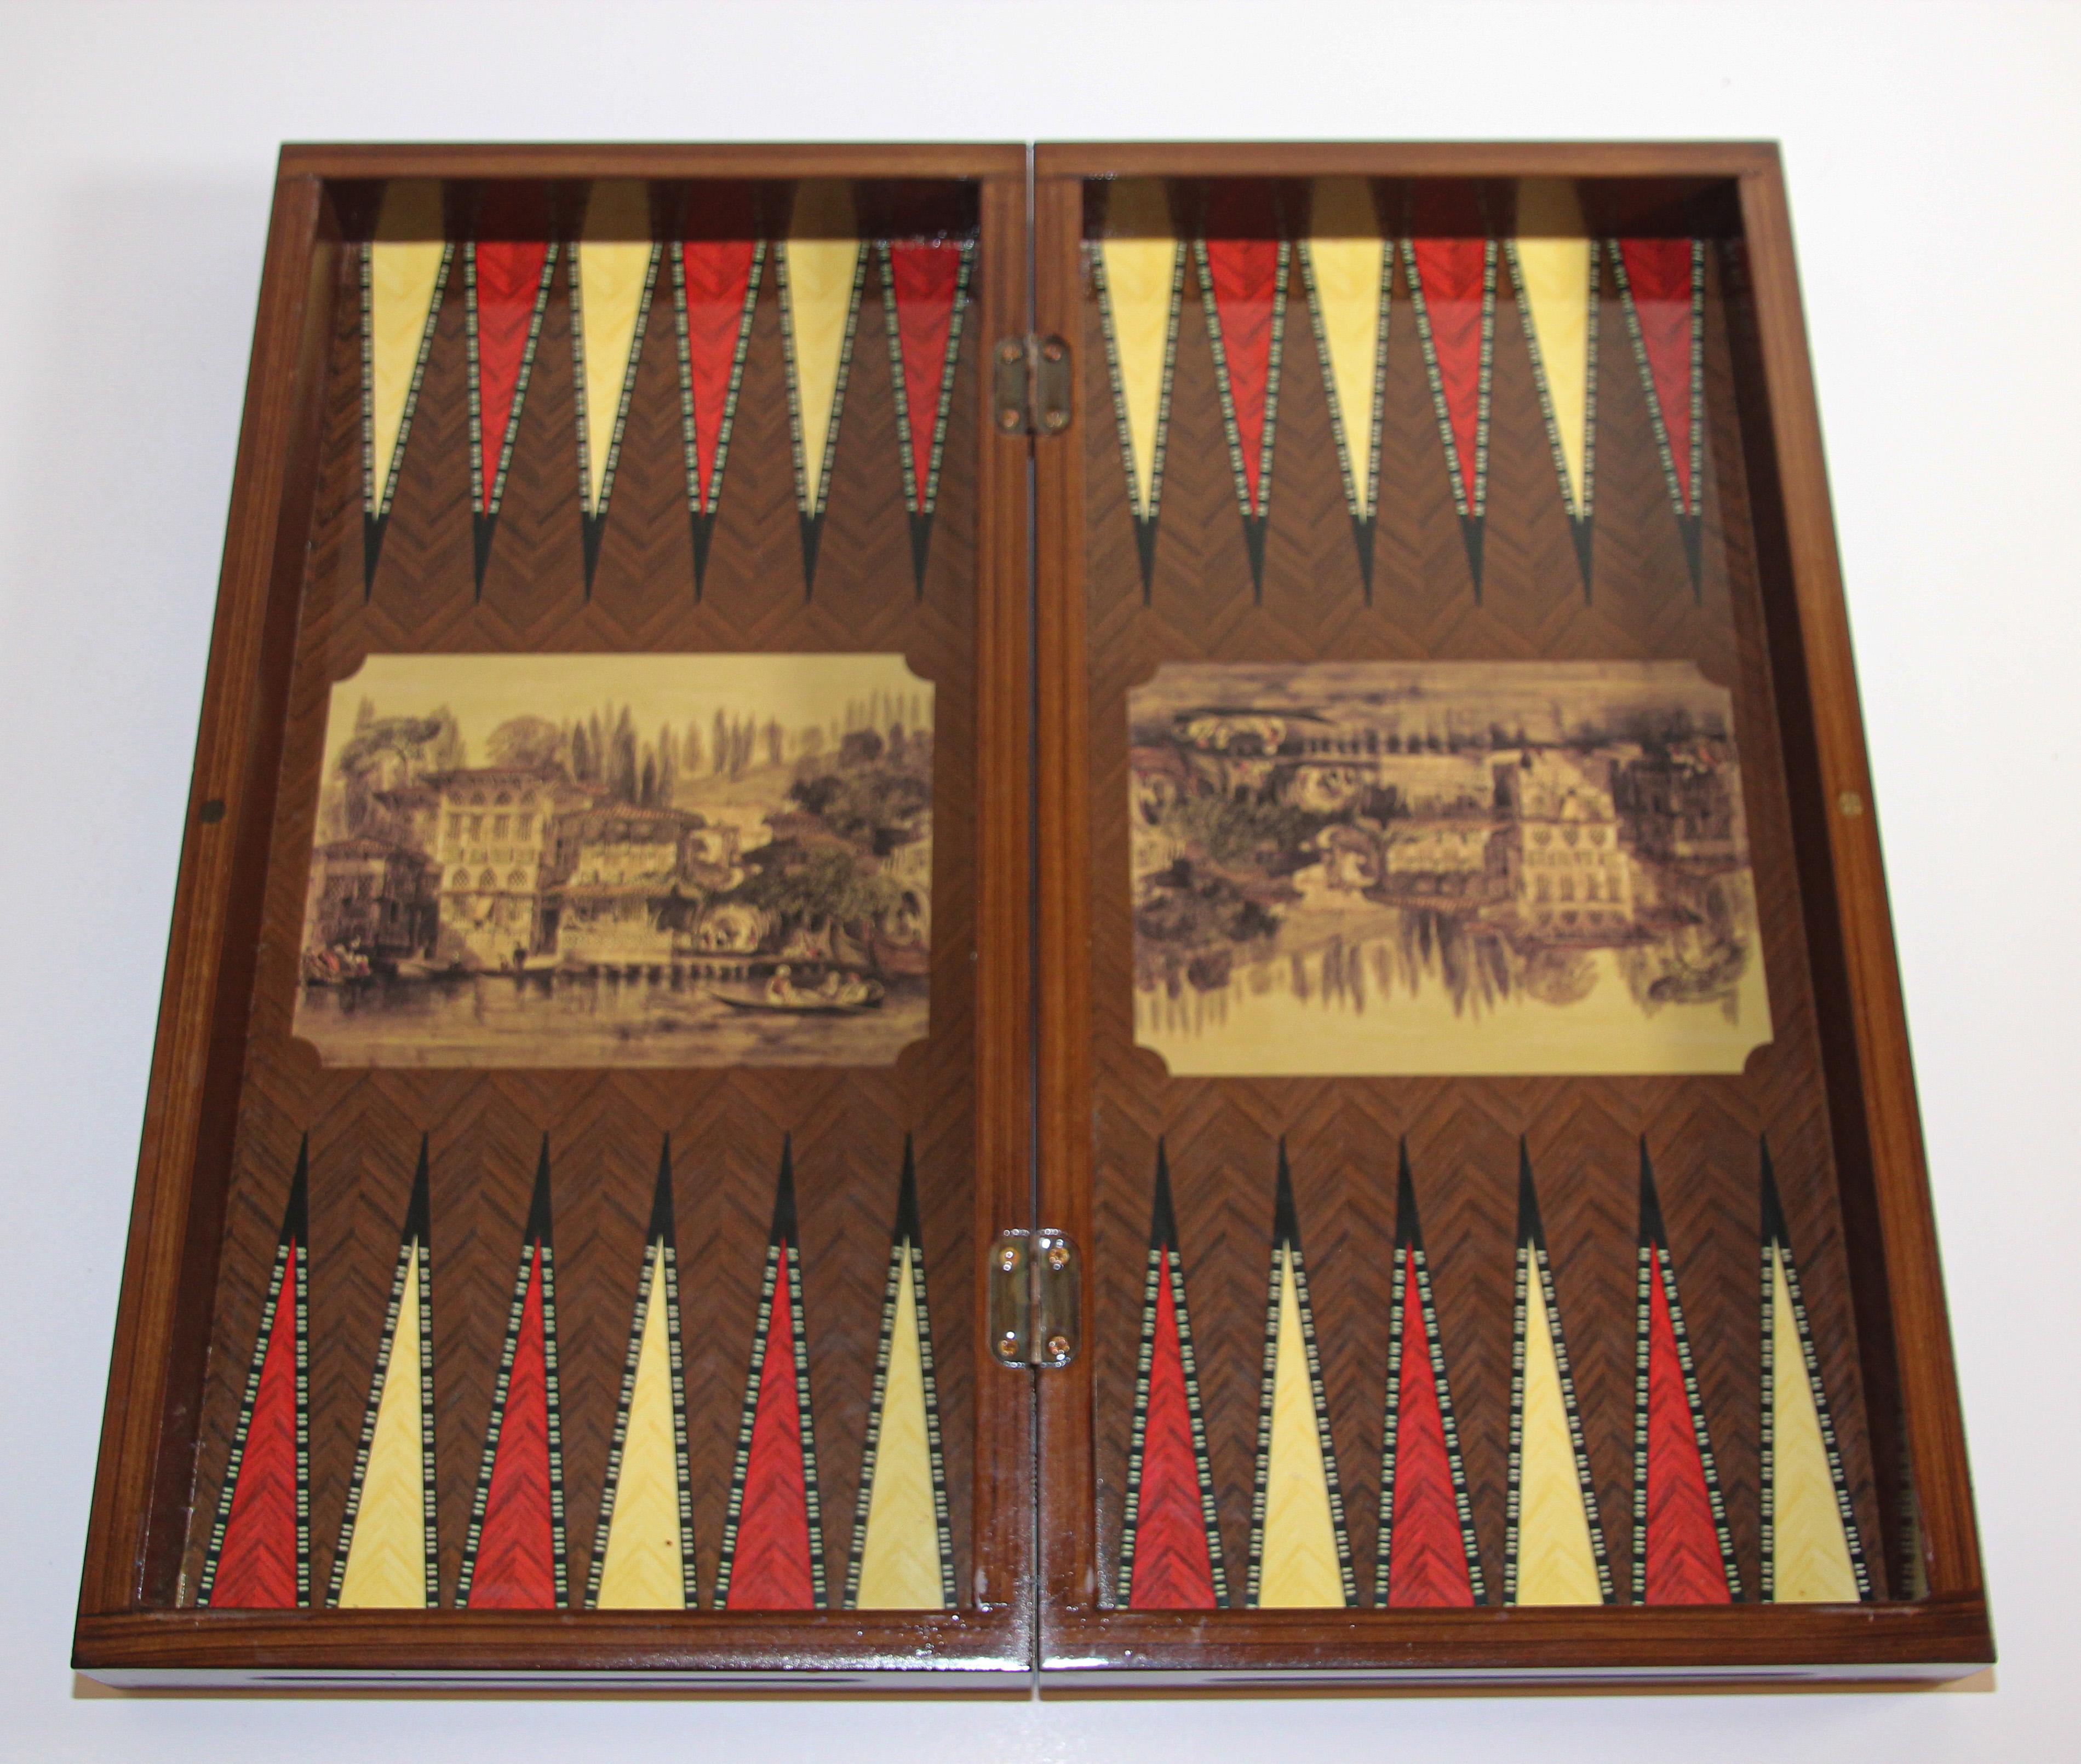 Large Venetian Backgammon board box with game pieces, Italy
Great game box features Paintings of Medieval Moorish scenes of Venice on the exterior and backgammon board on the interior with smaller paintings.
After oil paintings of the Entrance to